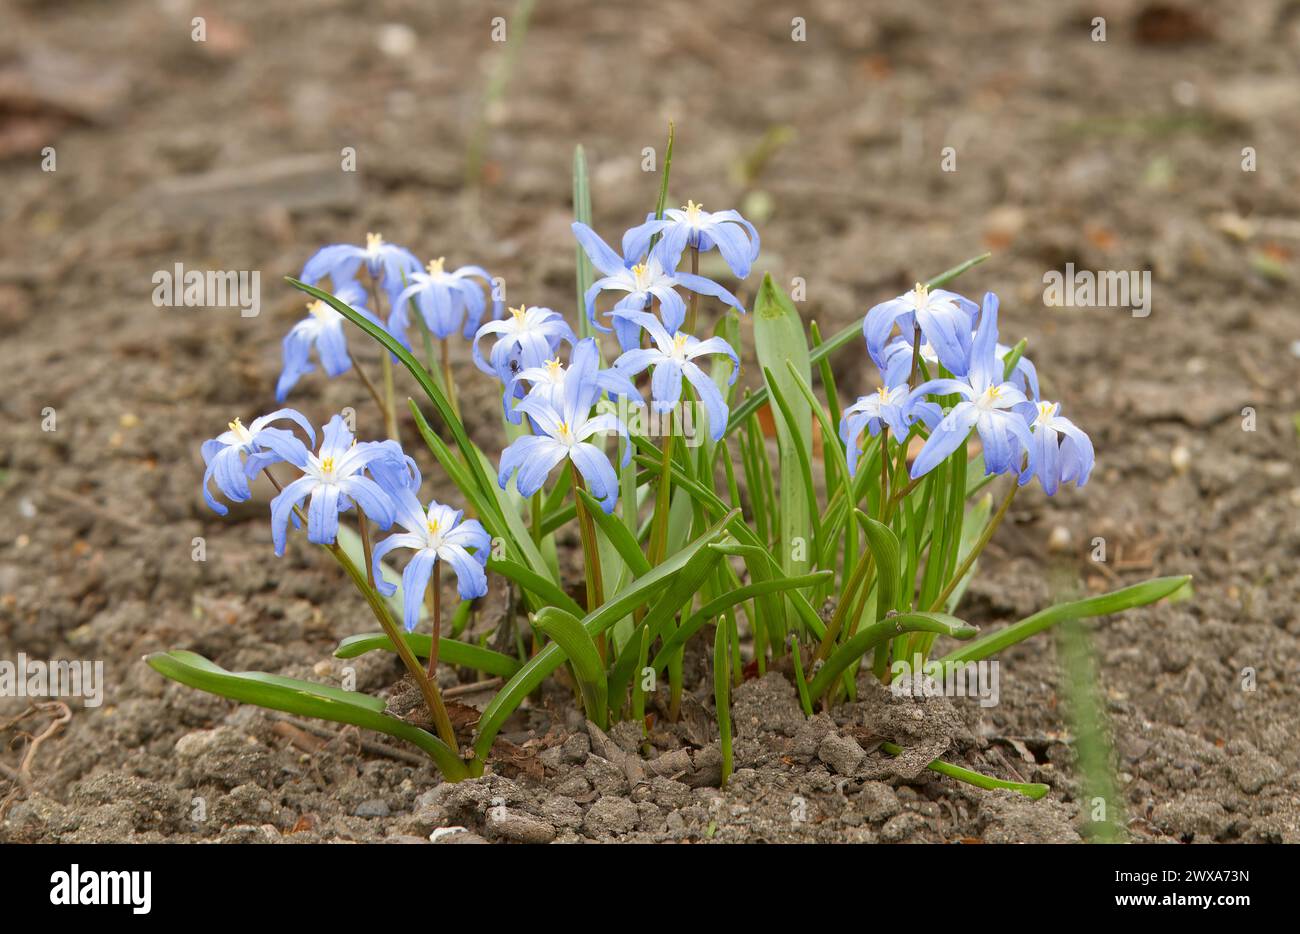 A flowering clump of Scilla forbesii, known as Forbes glory-of-the-snow in a flower bed on a sunny spring day. Stock Photo